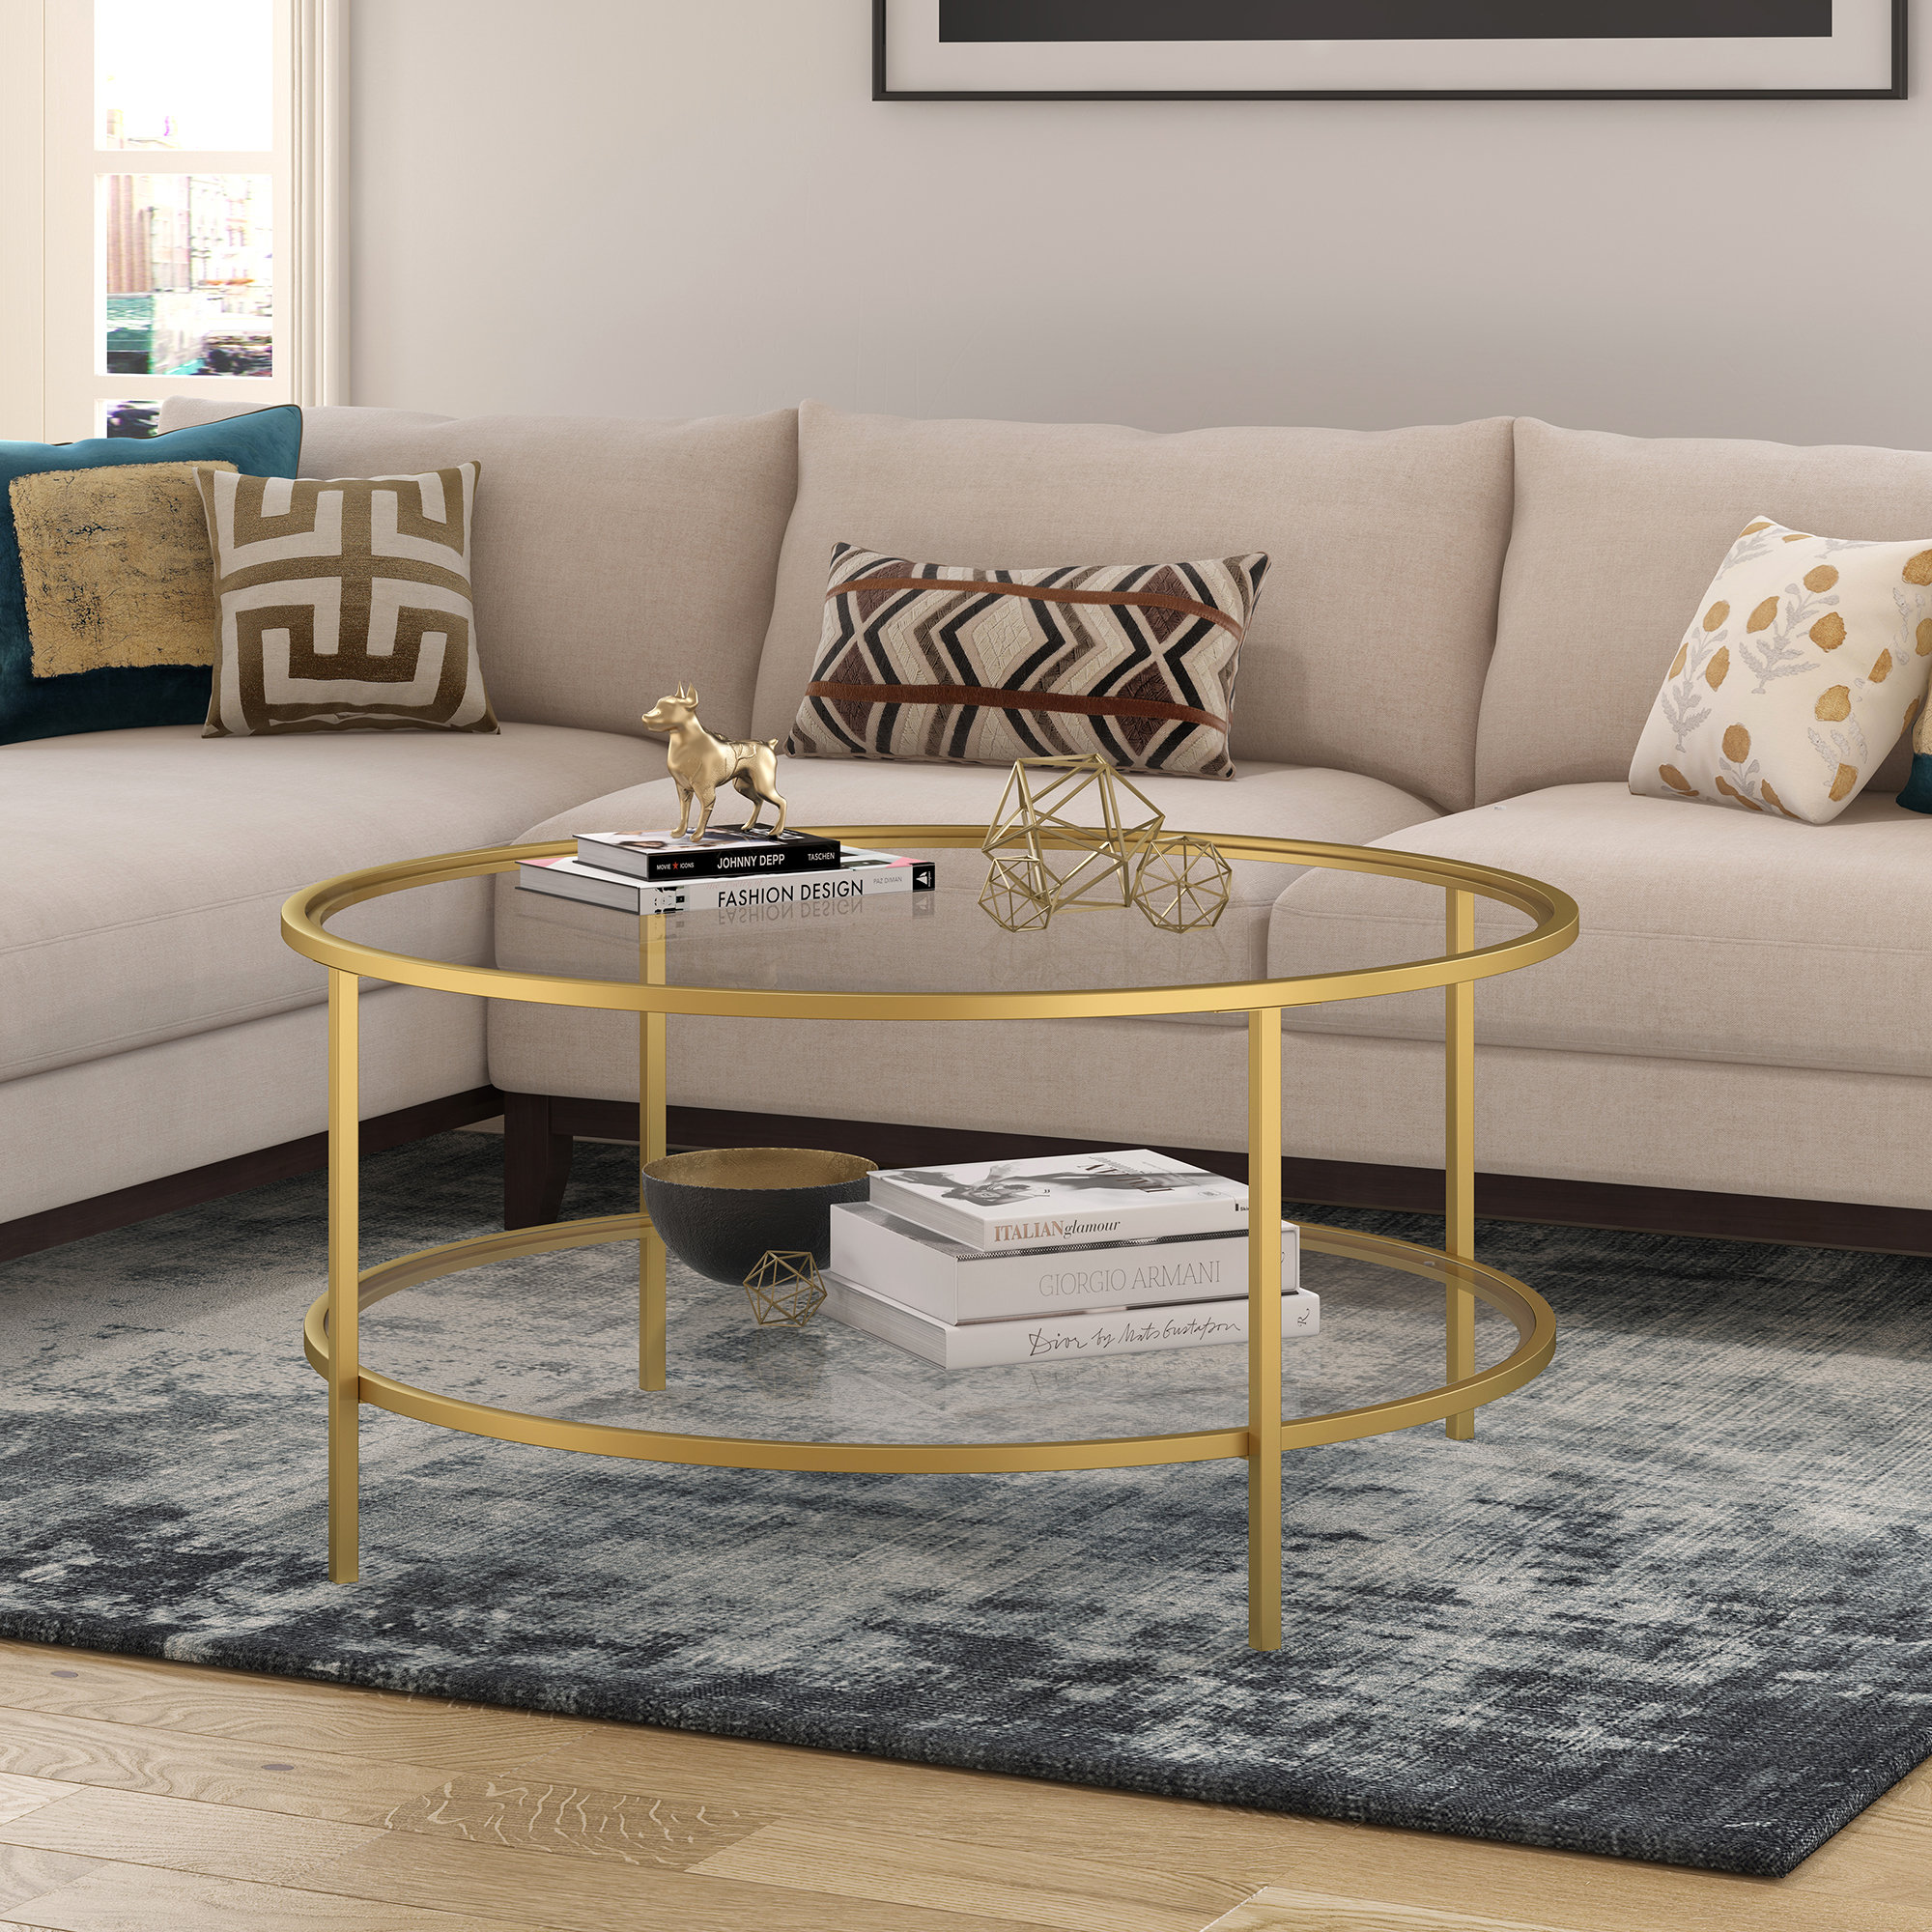 Modern Minimalist Two-Story Coffee Table Living Room Coffee Desk with Sturdy Steel Legs,Ship from US Warehouse